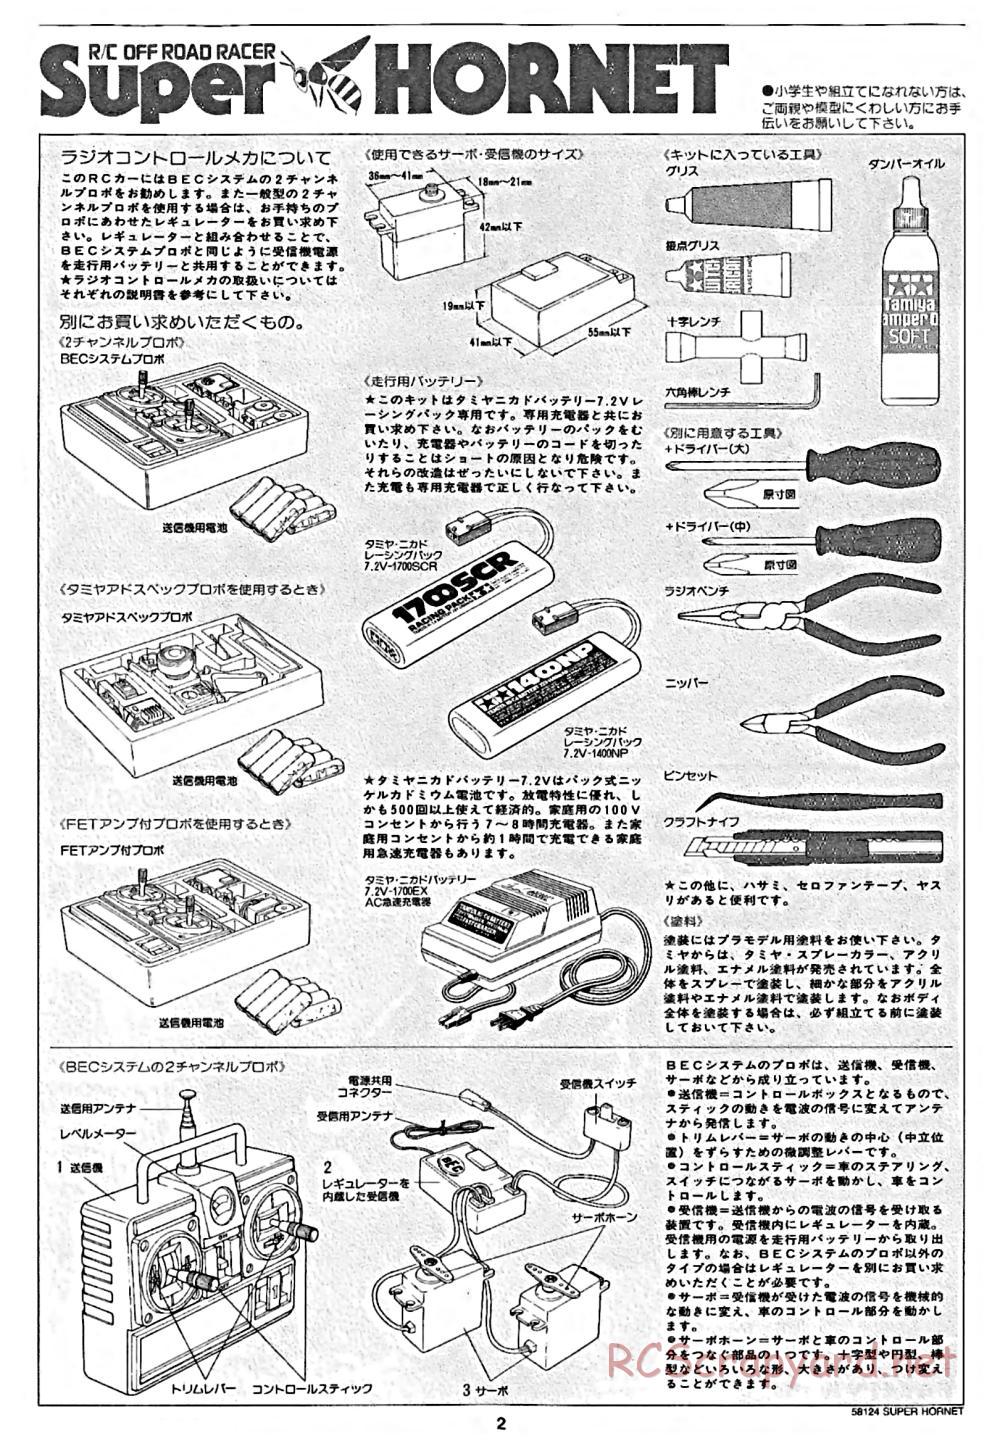 Tamiya - Super Hornet Chassis - Manual - Page 2